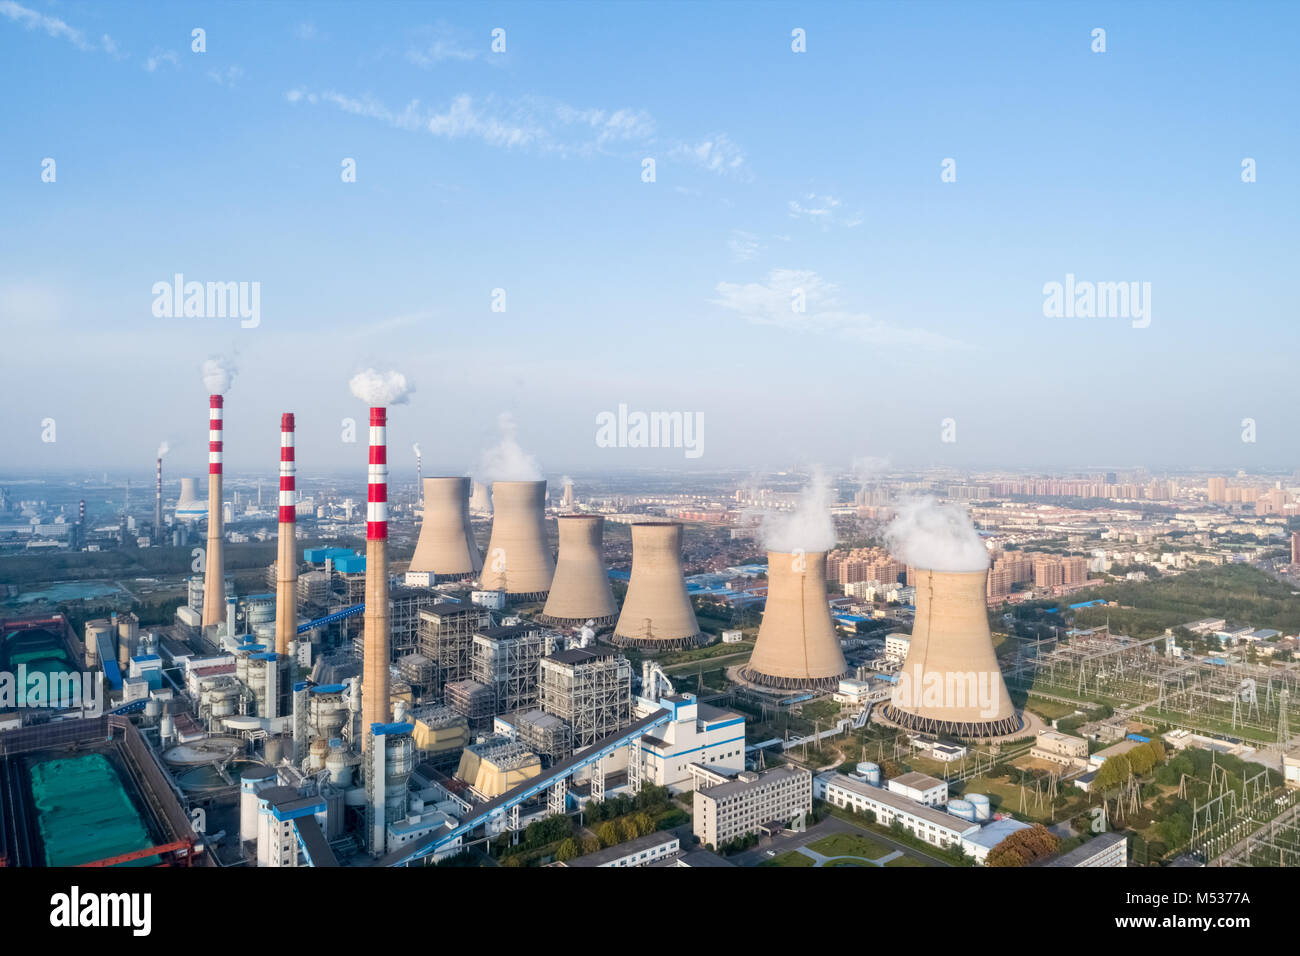 modern large thermal power plant Stock Photo